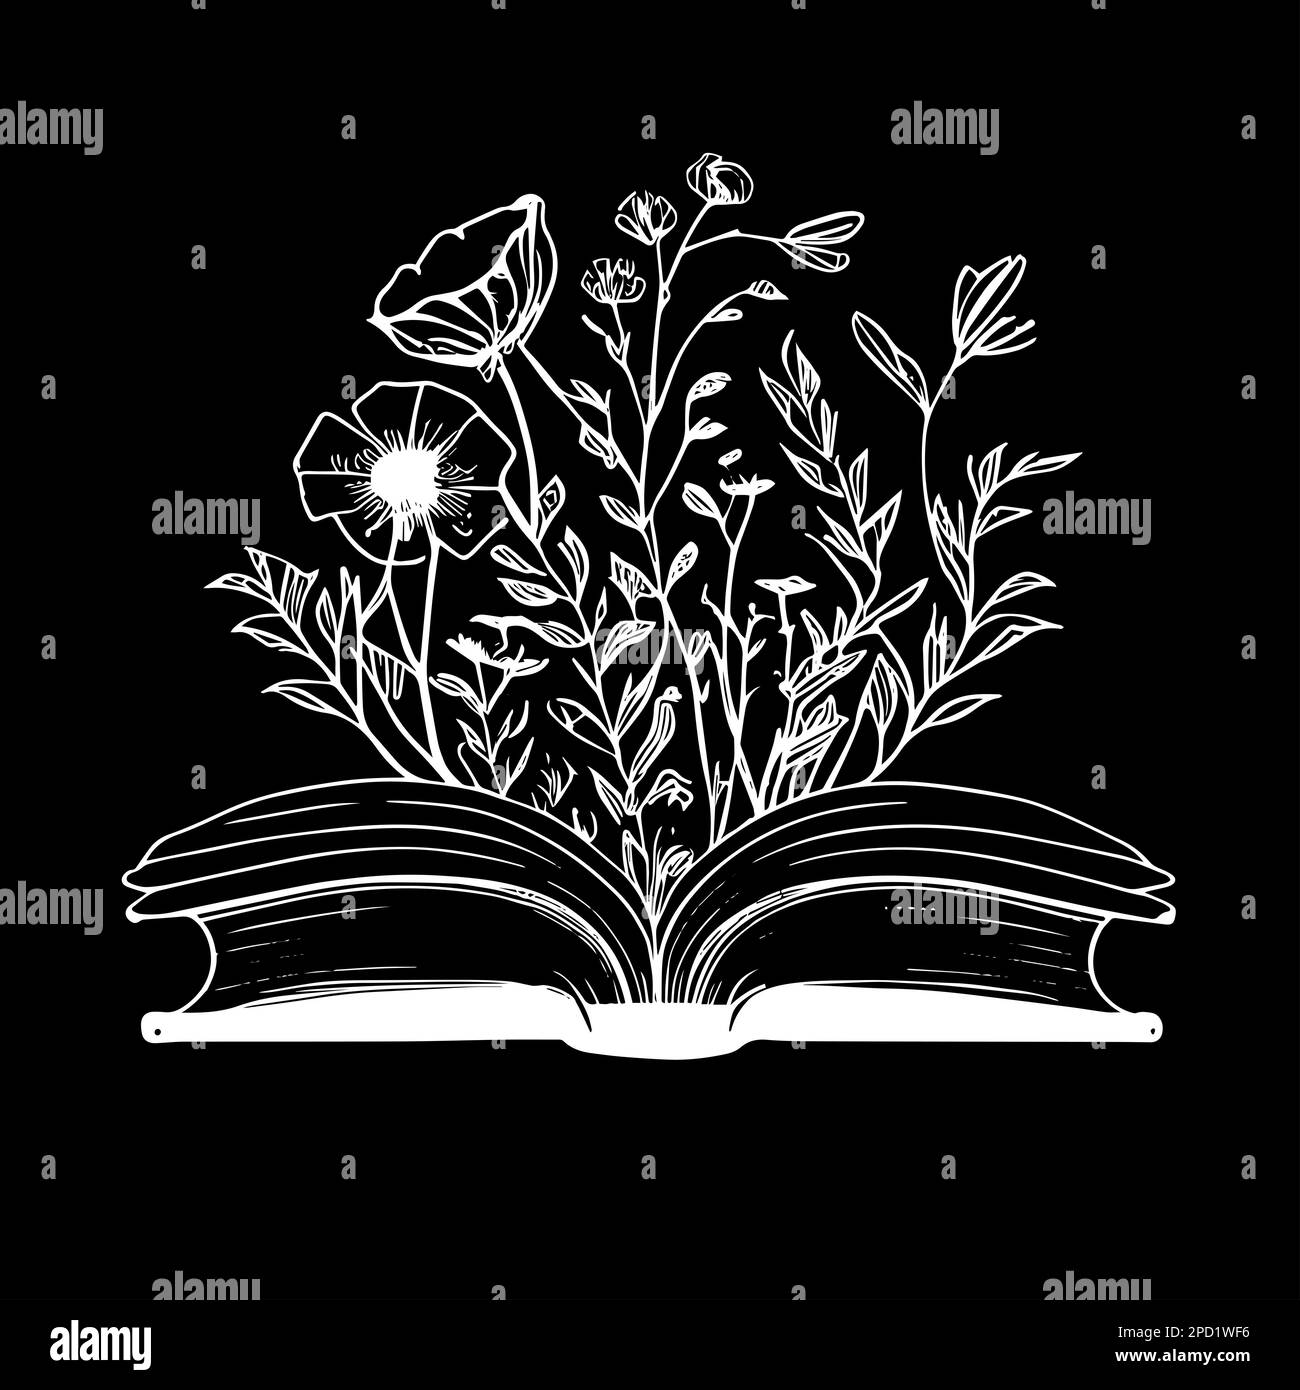 Book with flowers line art vector icon, isolated floral clipart. Open storybook and wildflowers boho decorative composition, black and white spring or Stock Photo